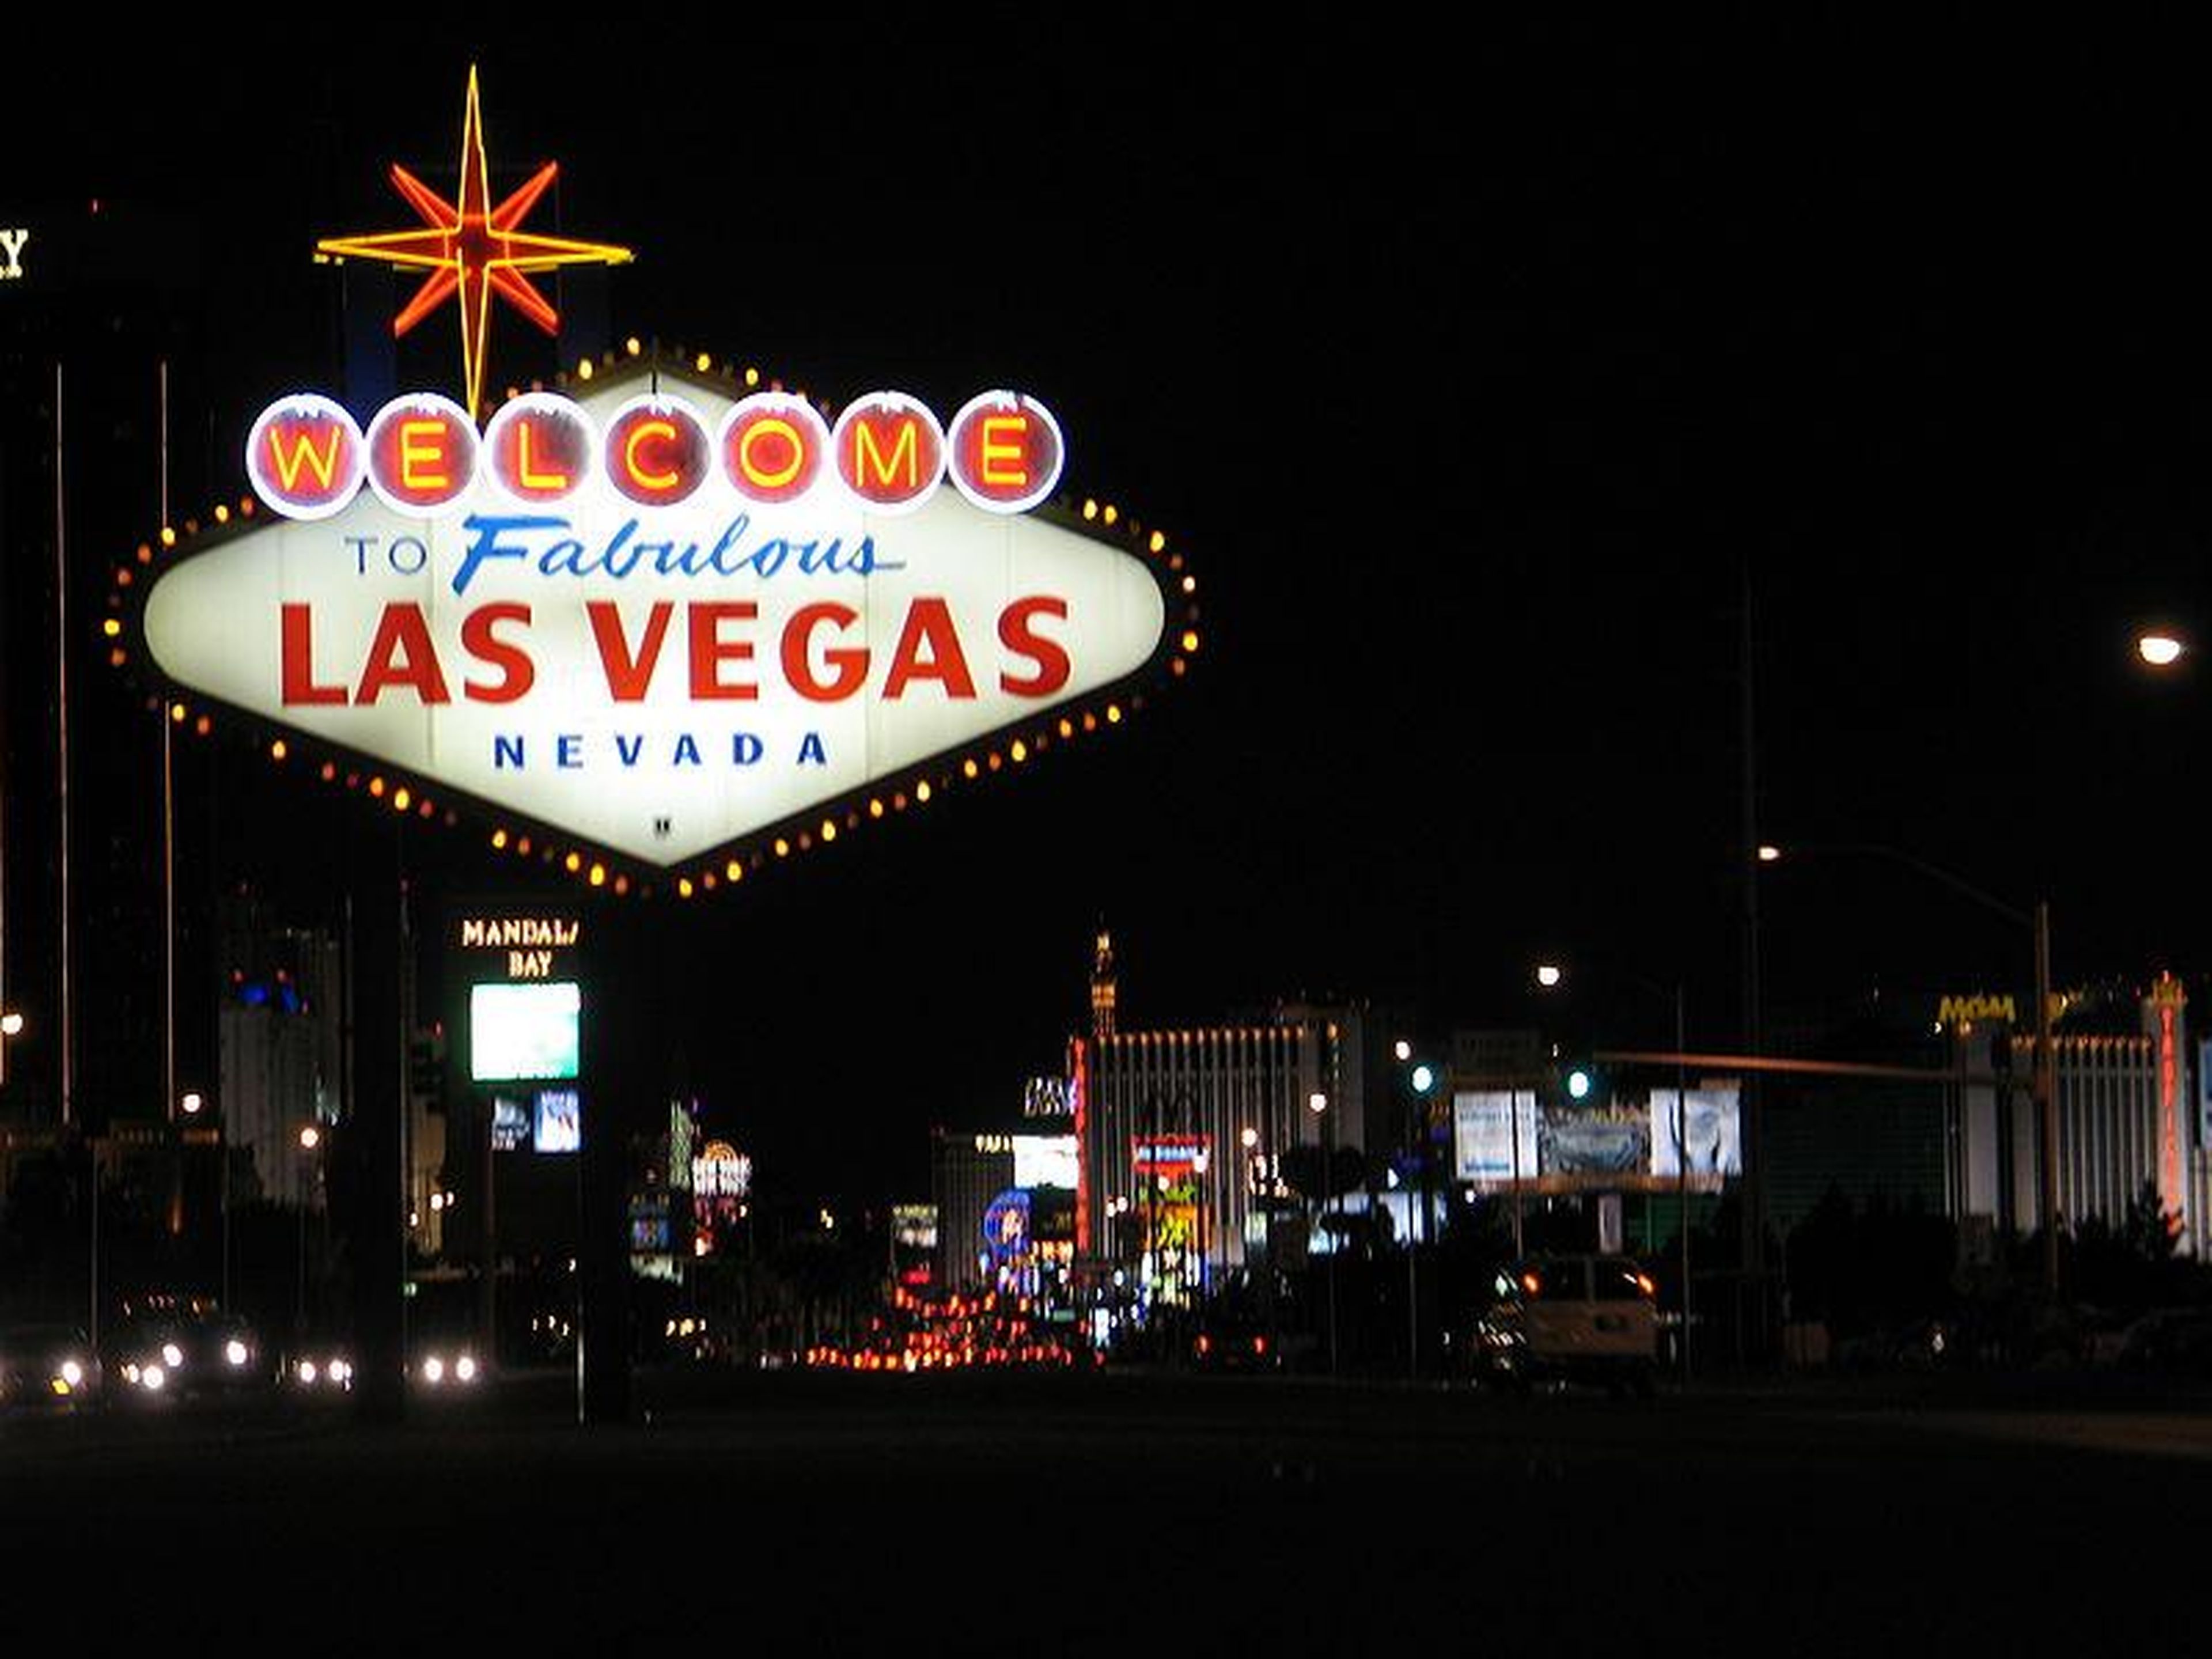 Las Vegas is consistently ranked as one of the most fun cities in America. The city is known for its bright lights and nonstop entertainment.